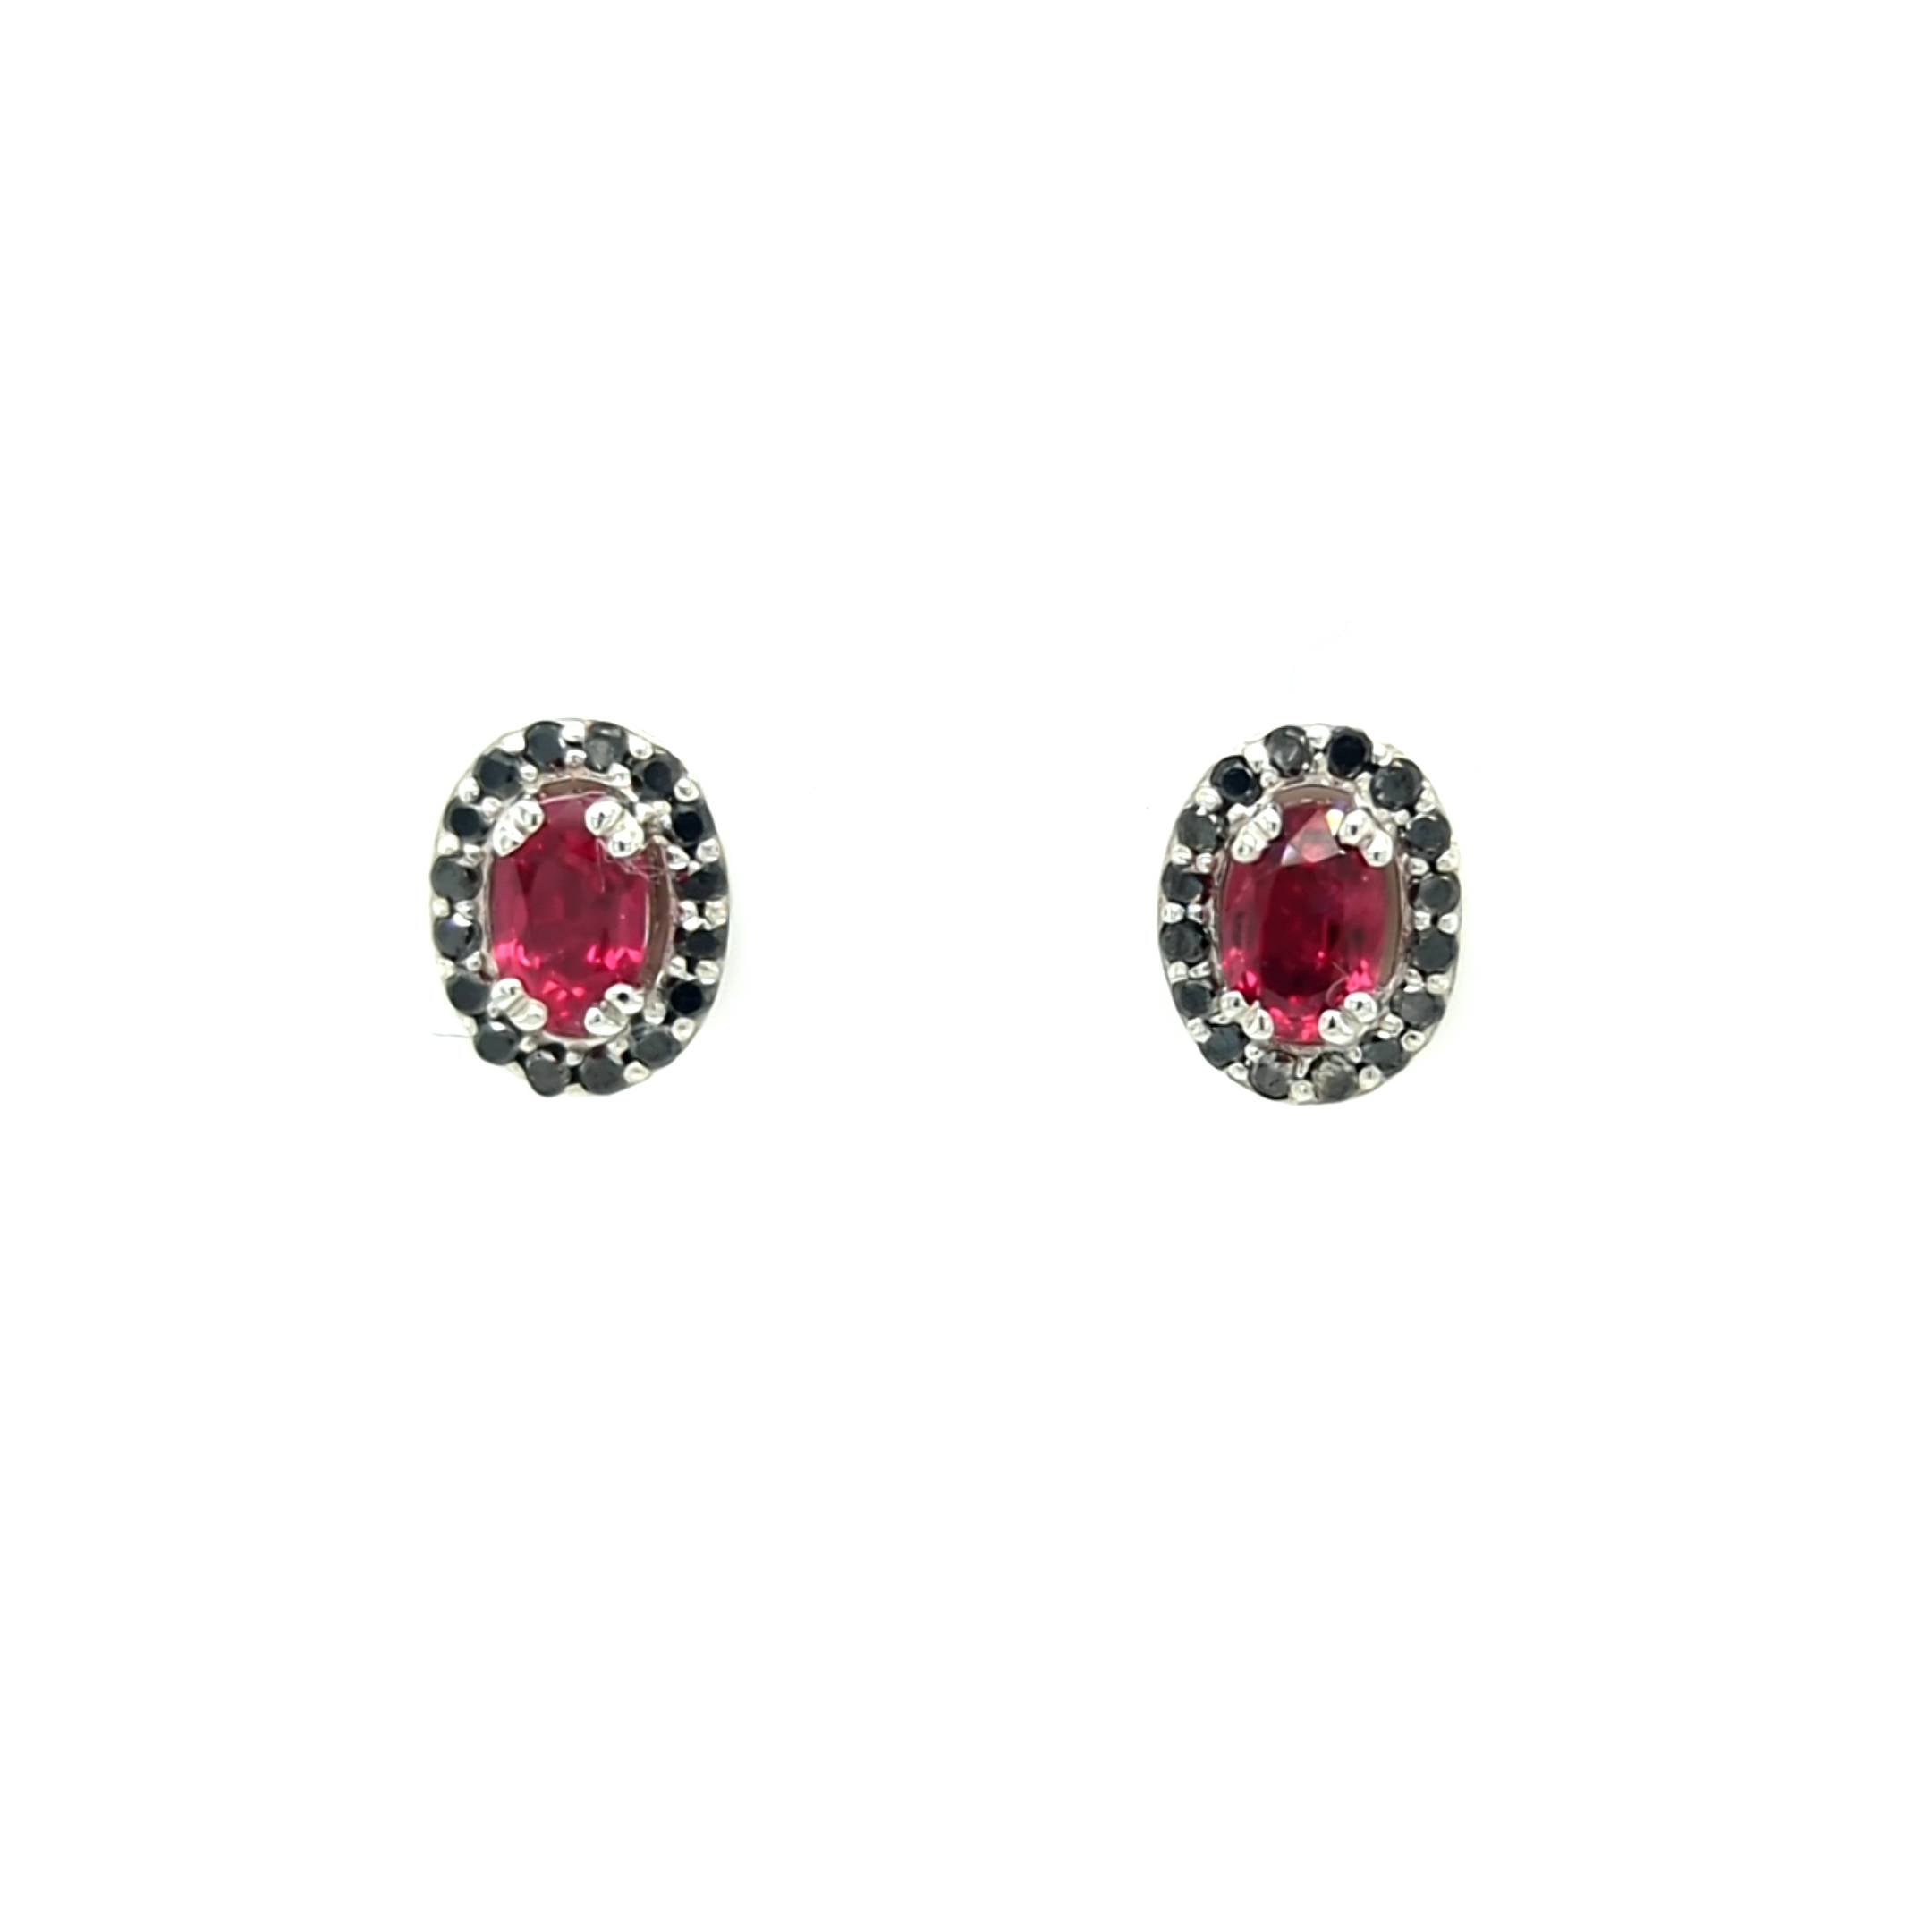 Ruby and Black Diamond Halo Stud Earrings in 14k White Gold